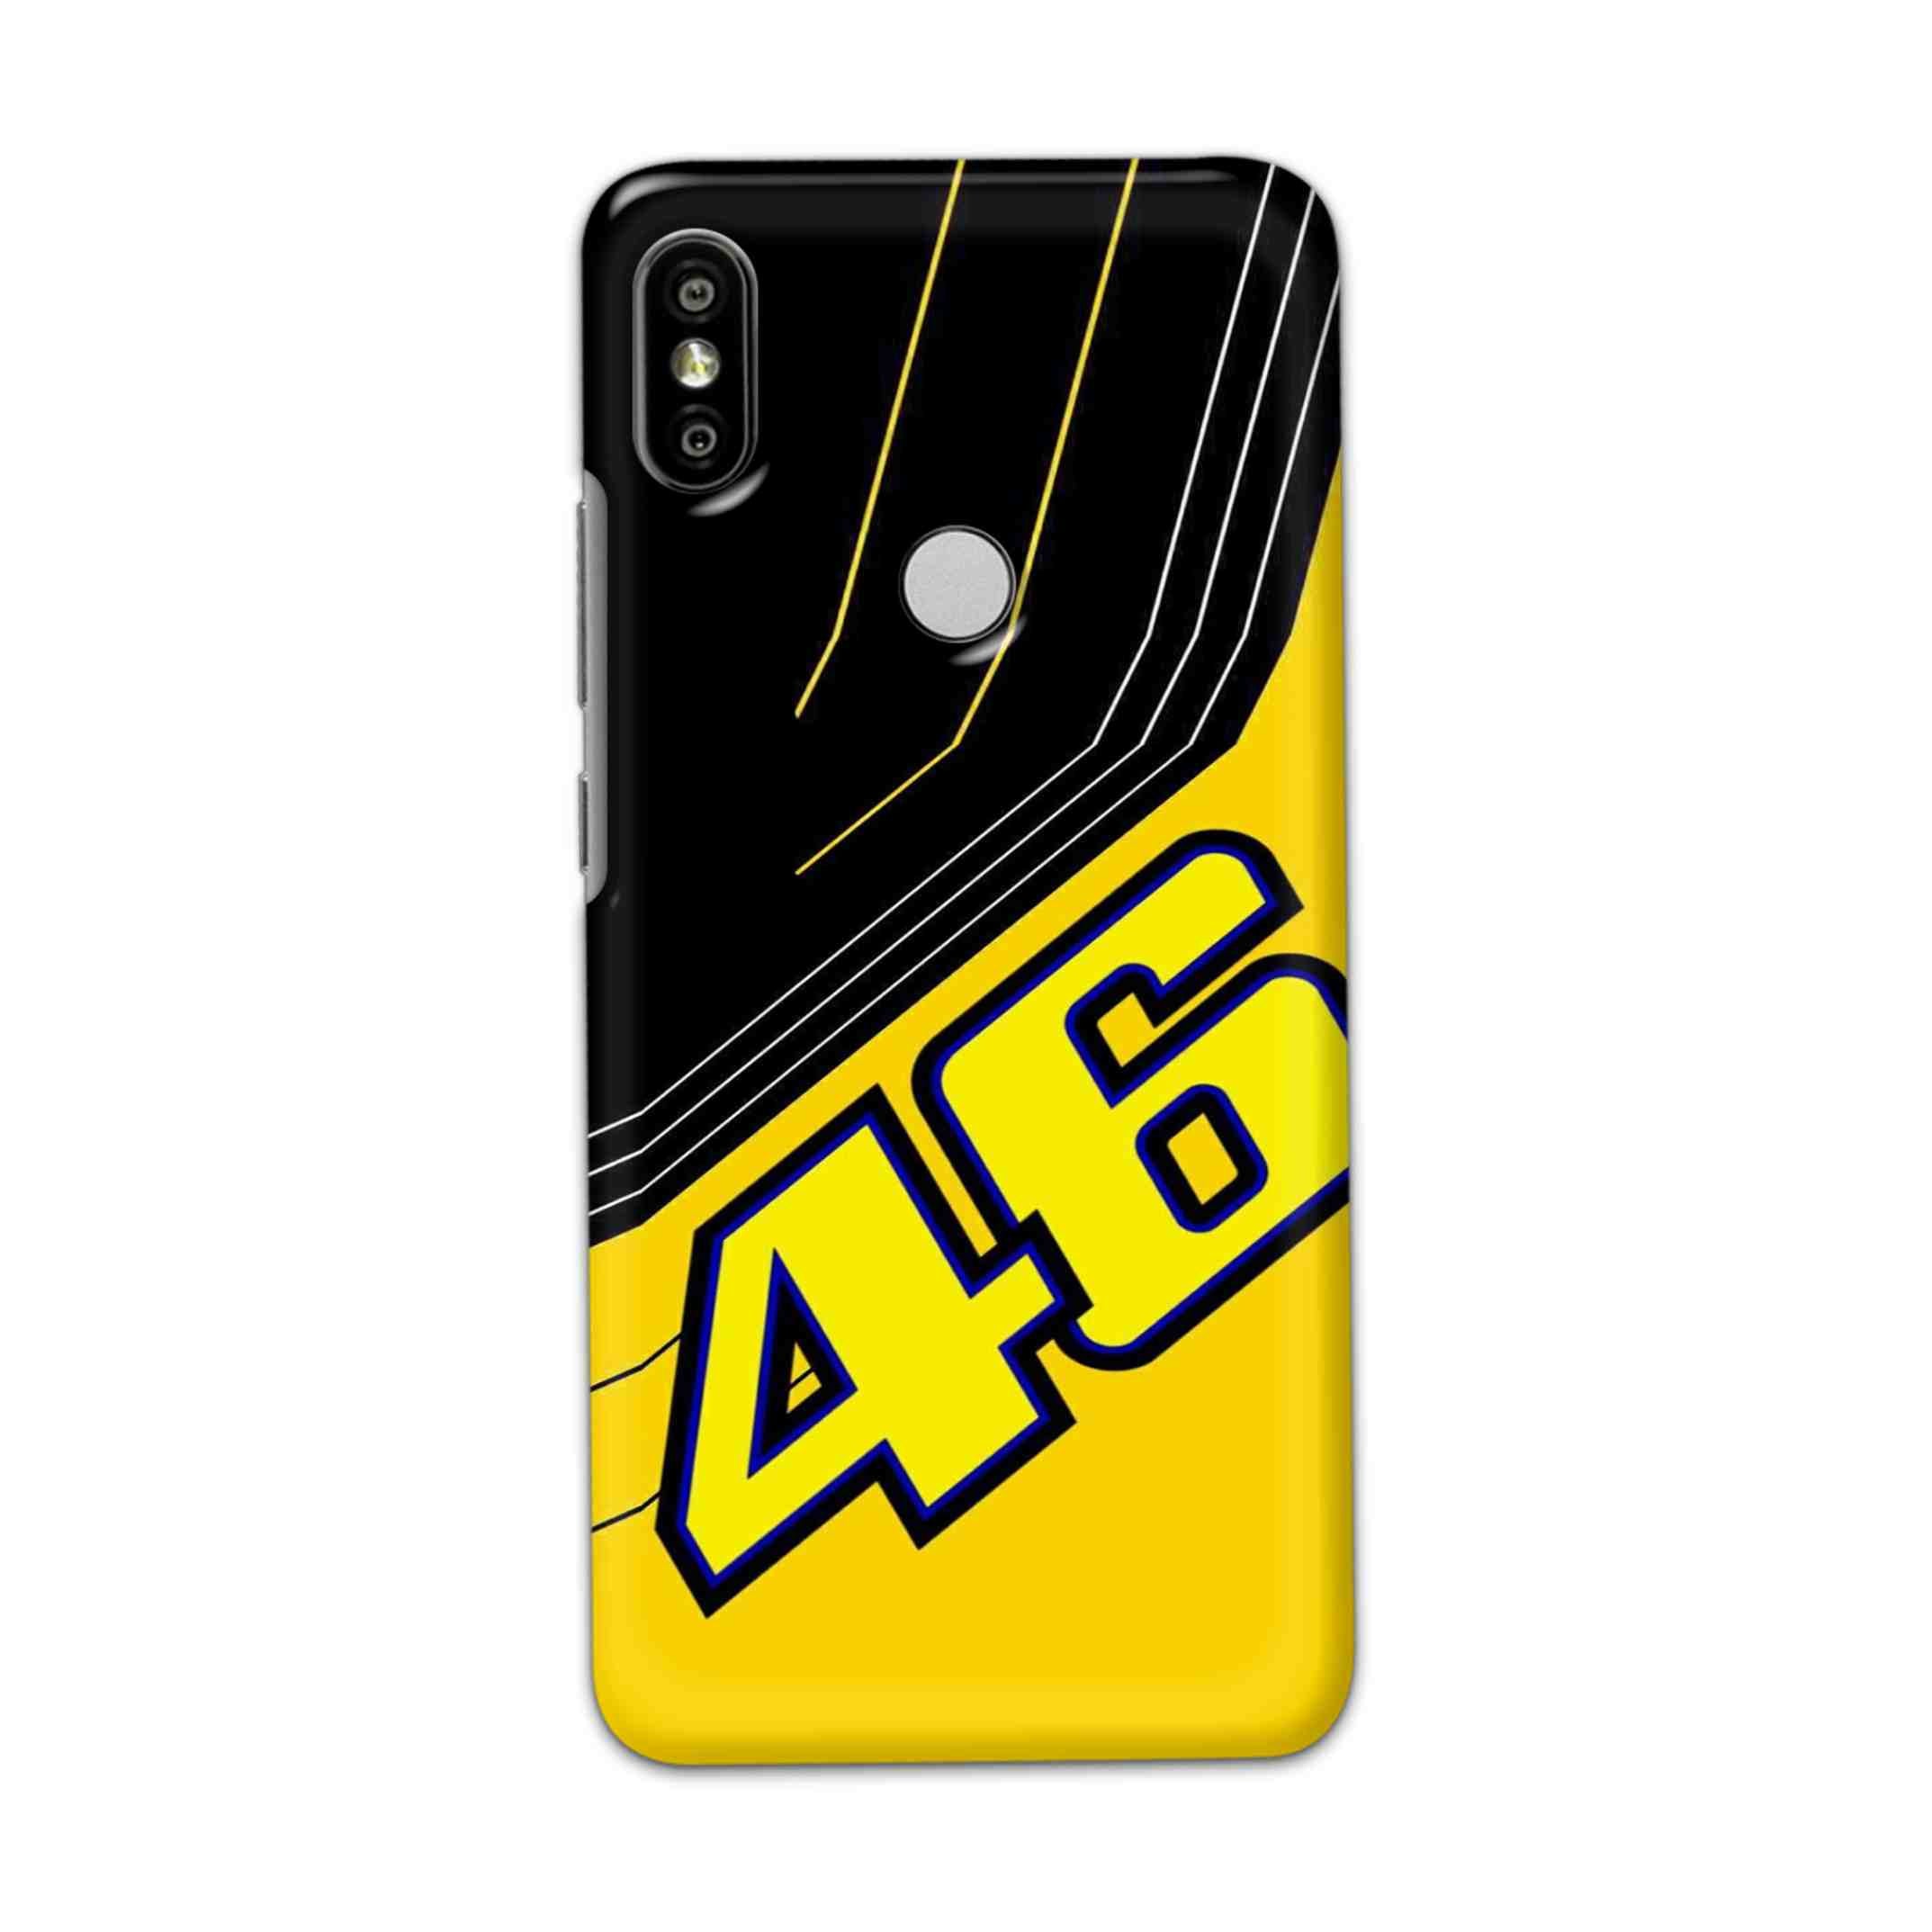 Buy 46 Hard Back Mobile Phone Case Cover For Redmi S2 / Y2 Online